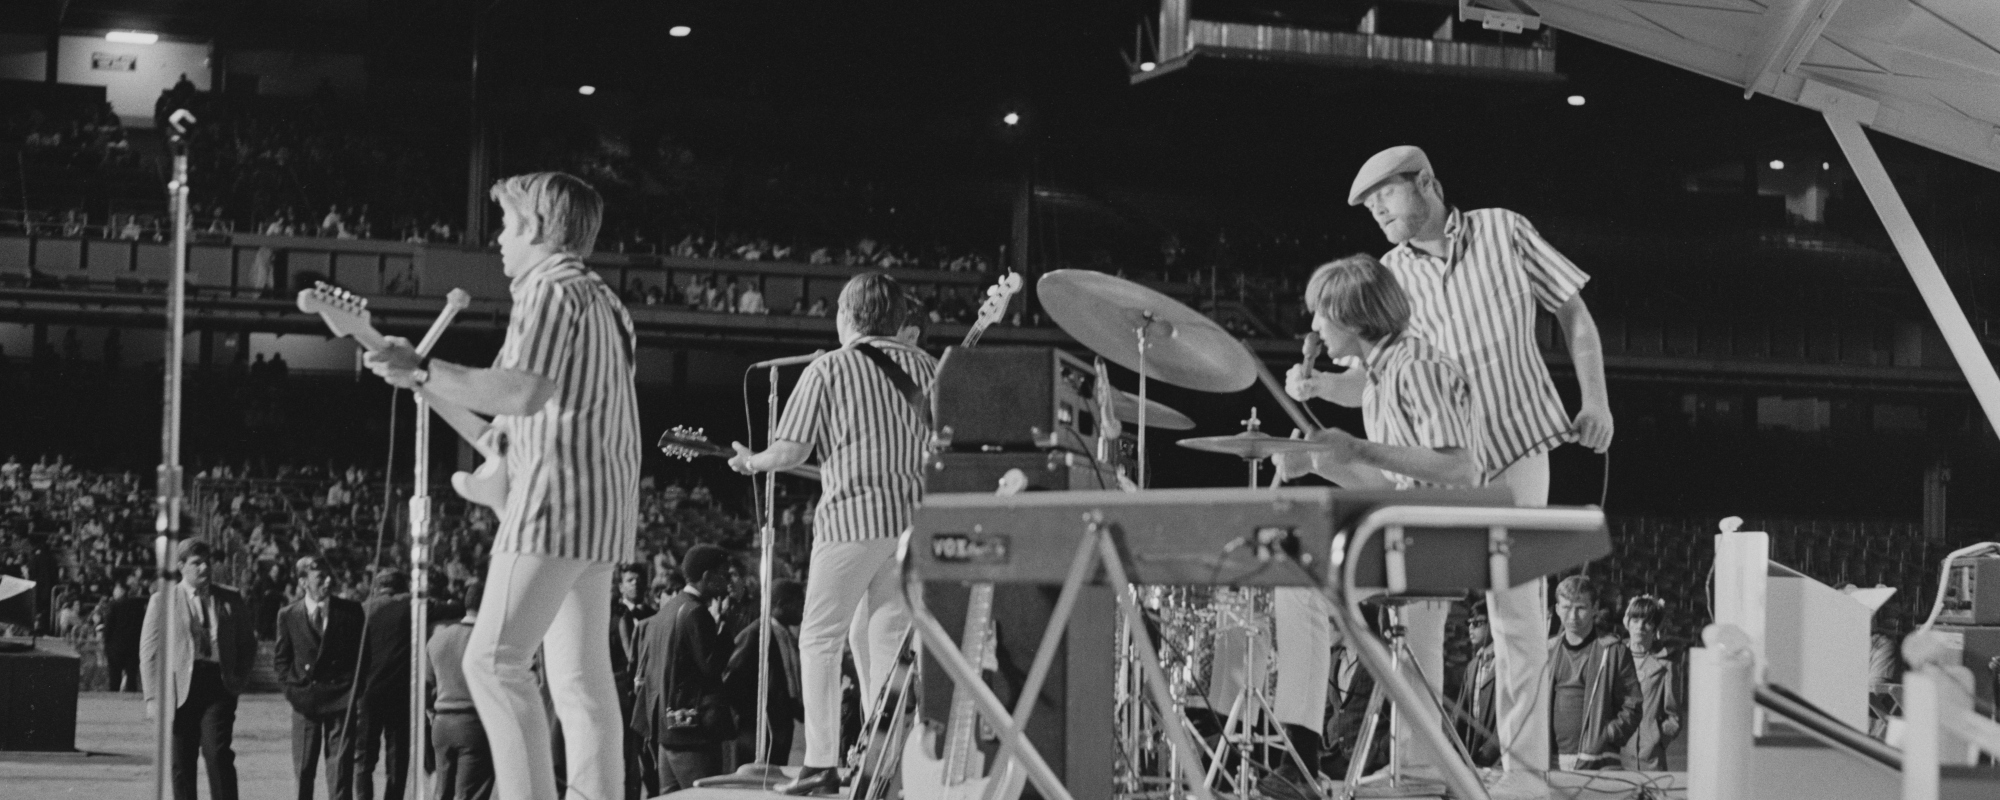 Images of the Old West: The Story Behind “Heroes and Villains” by The Beach Boys